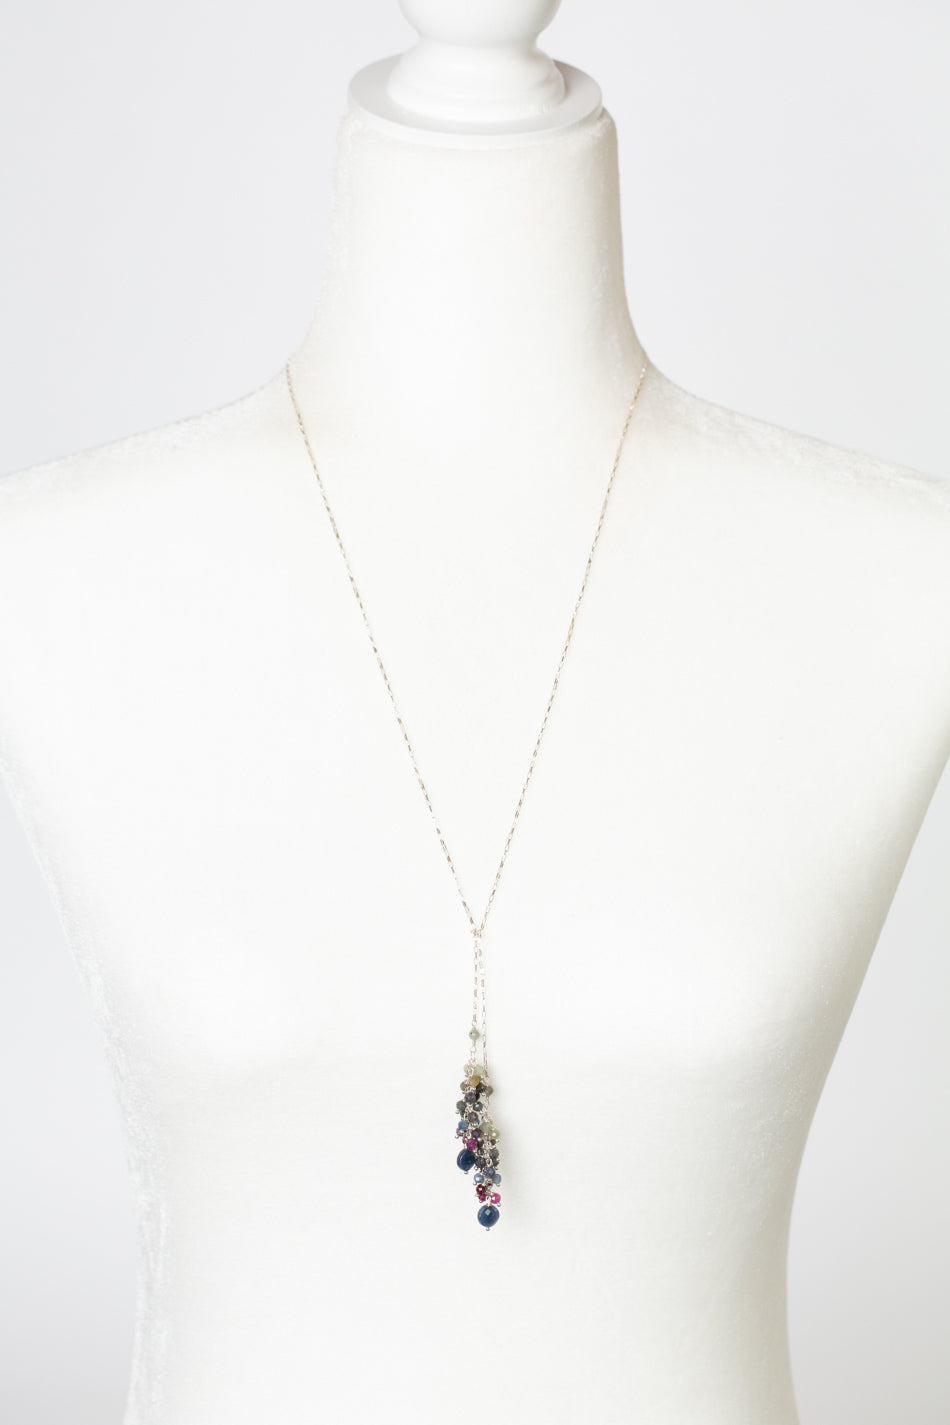 Limited Edition 29" Sapphire Tassel Necklace